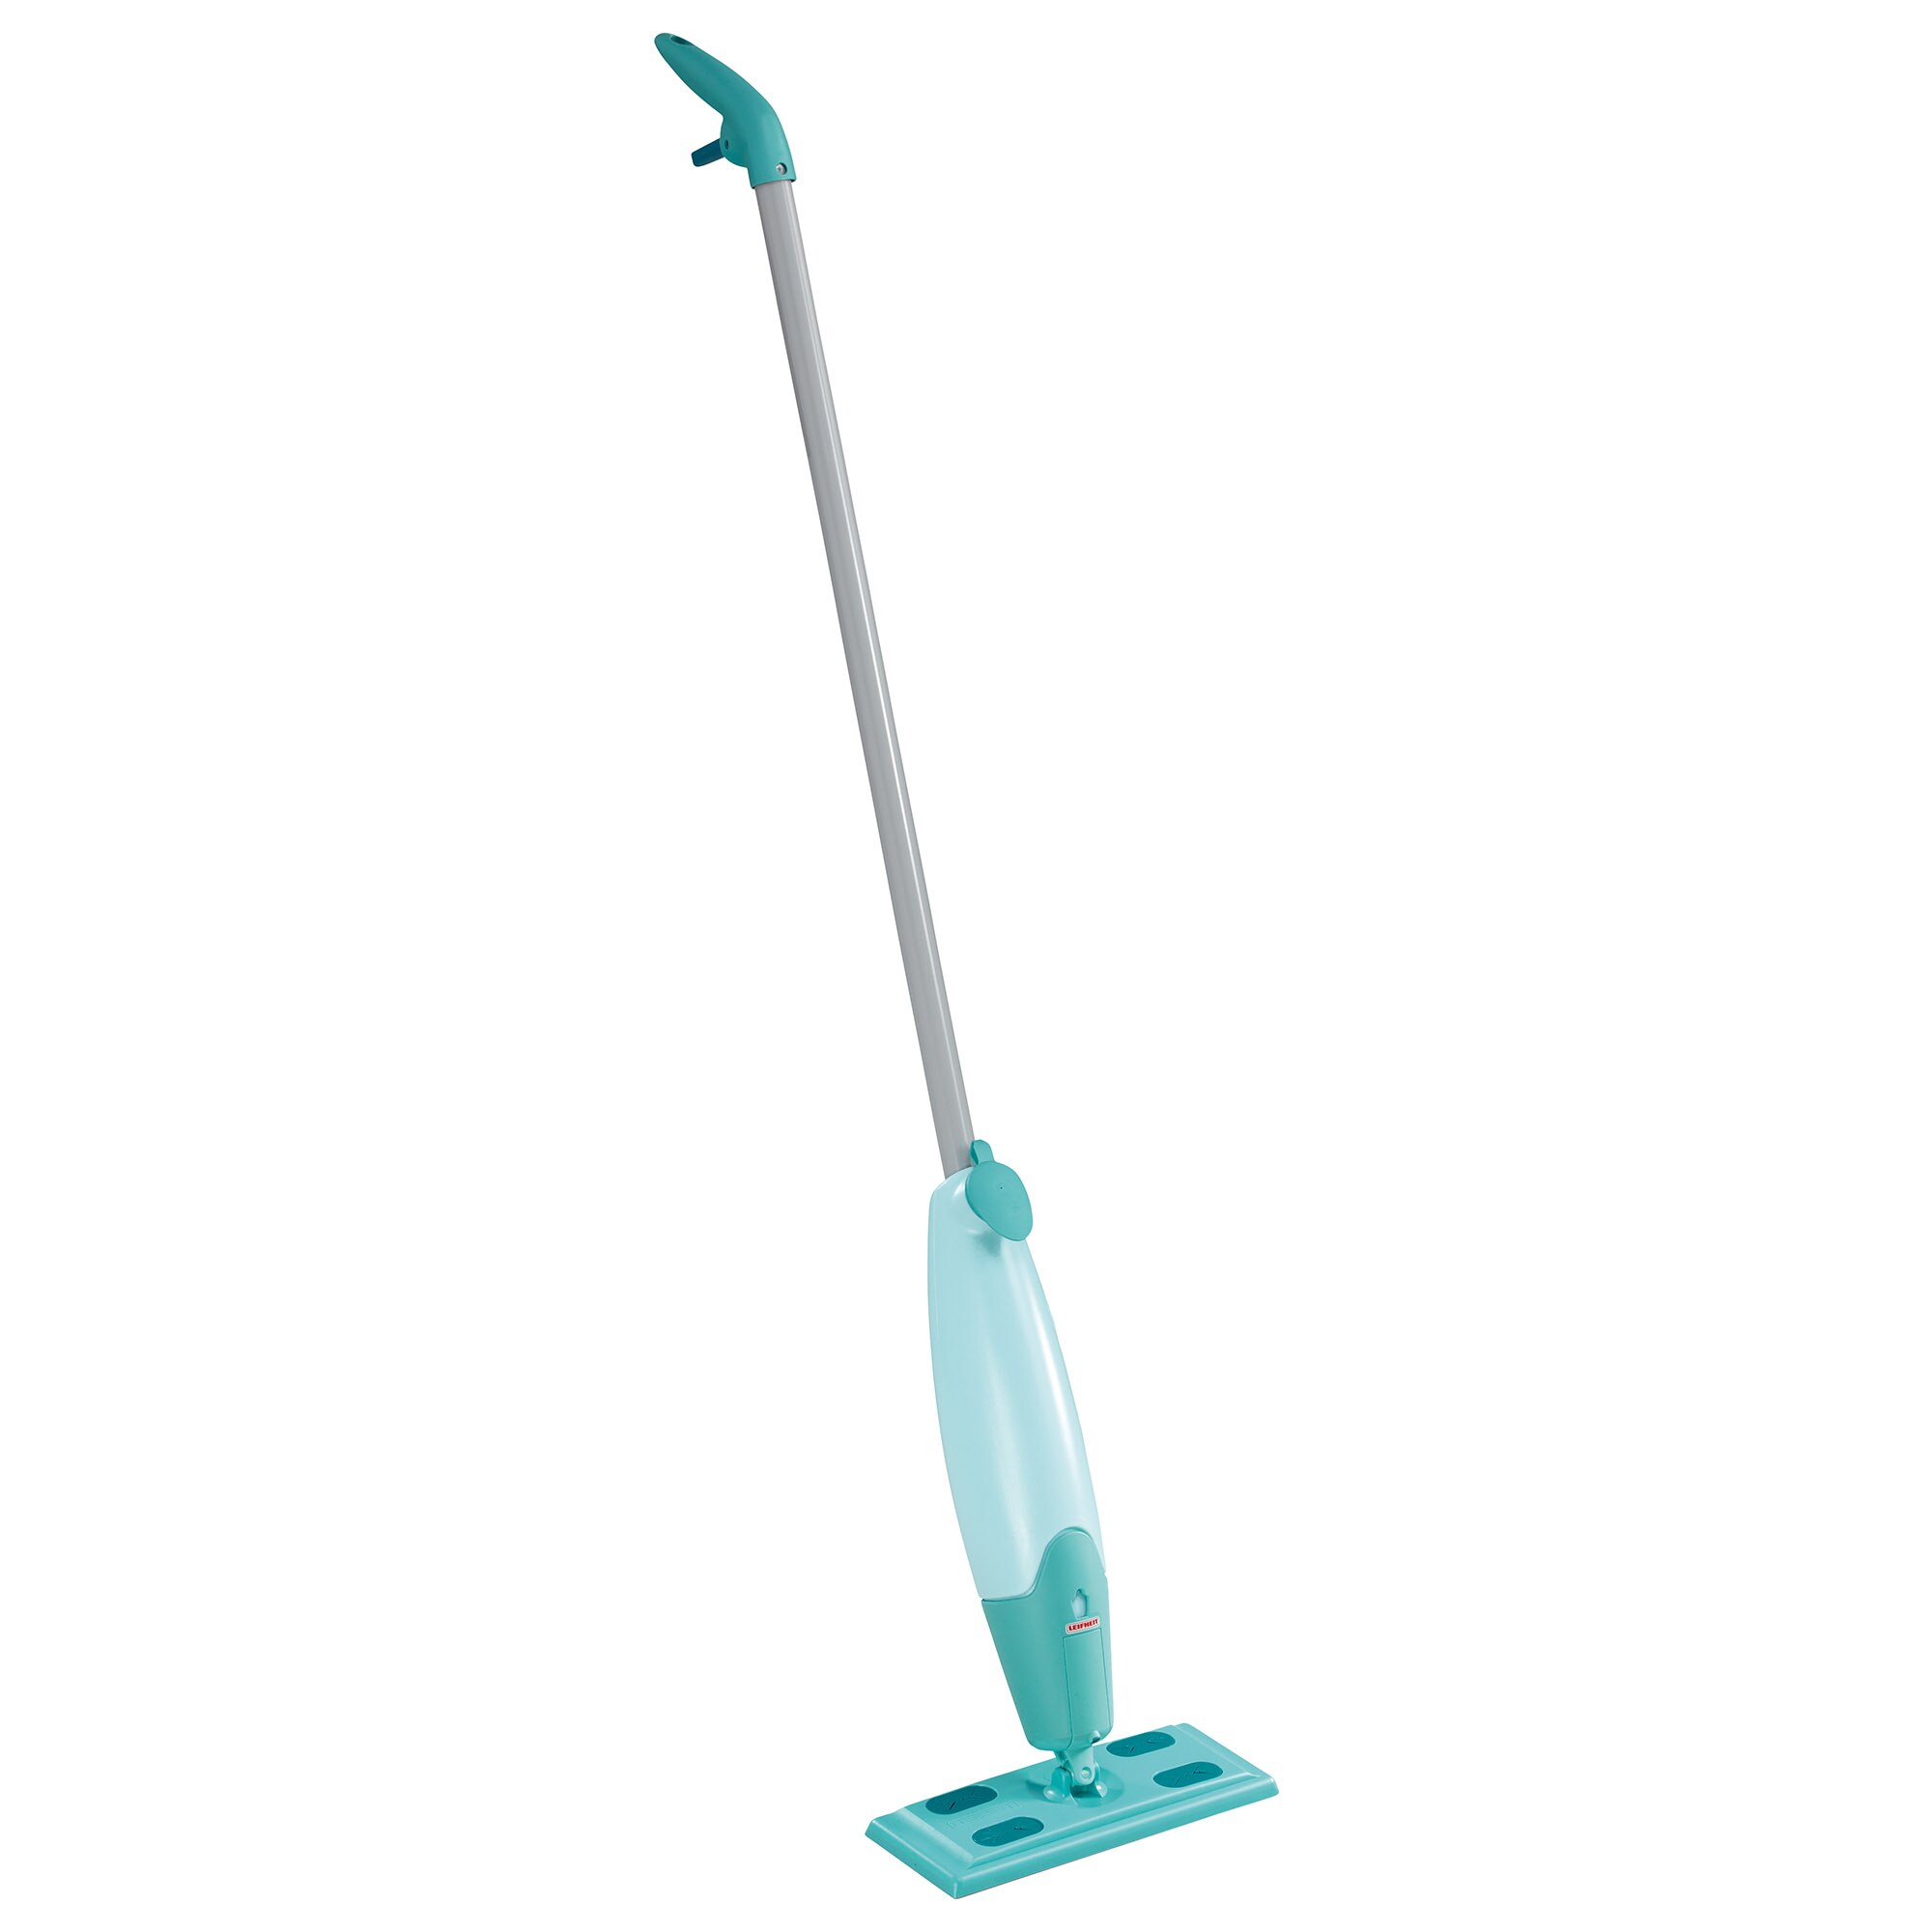 Leifheit Pico System Nozzle Mop at Lowes.com